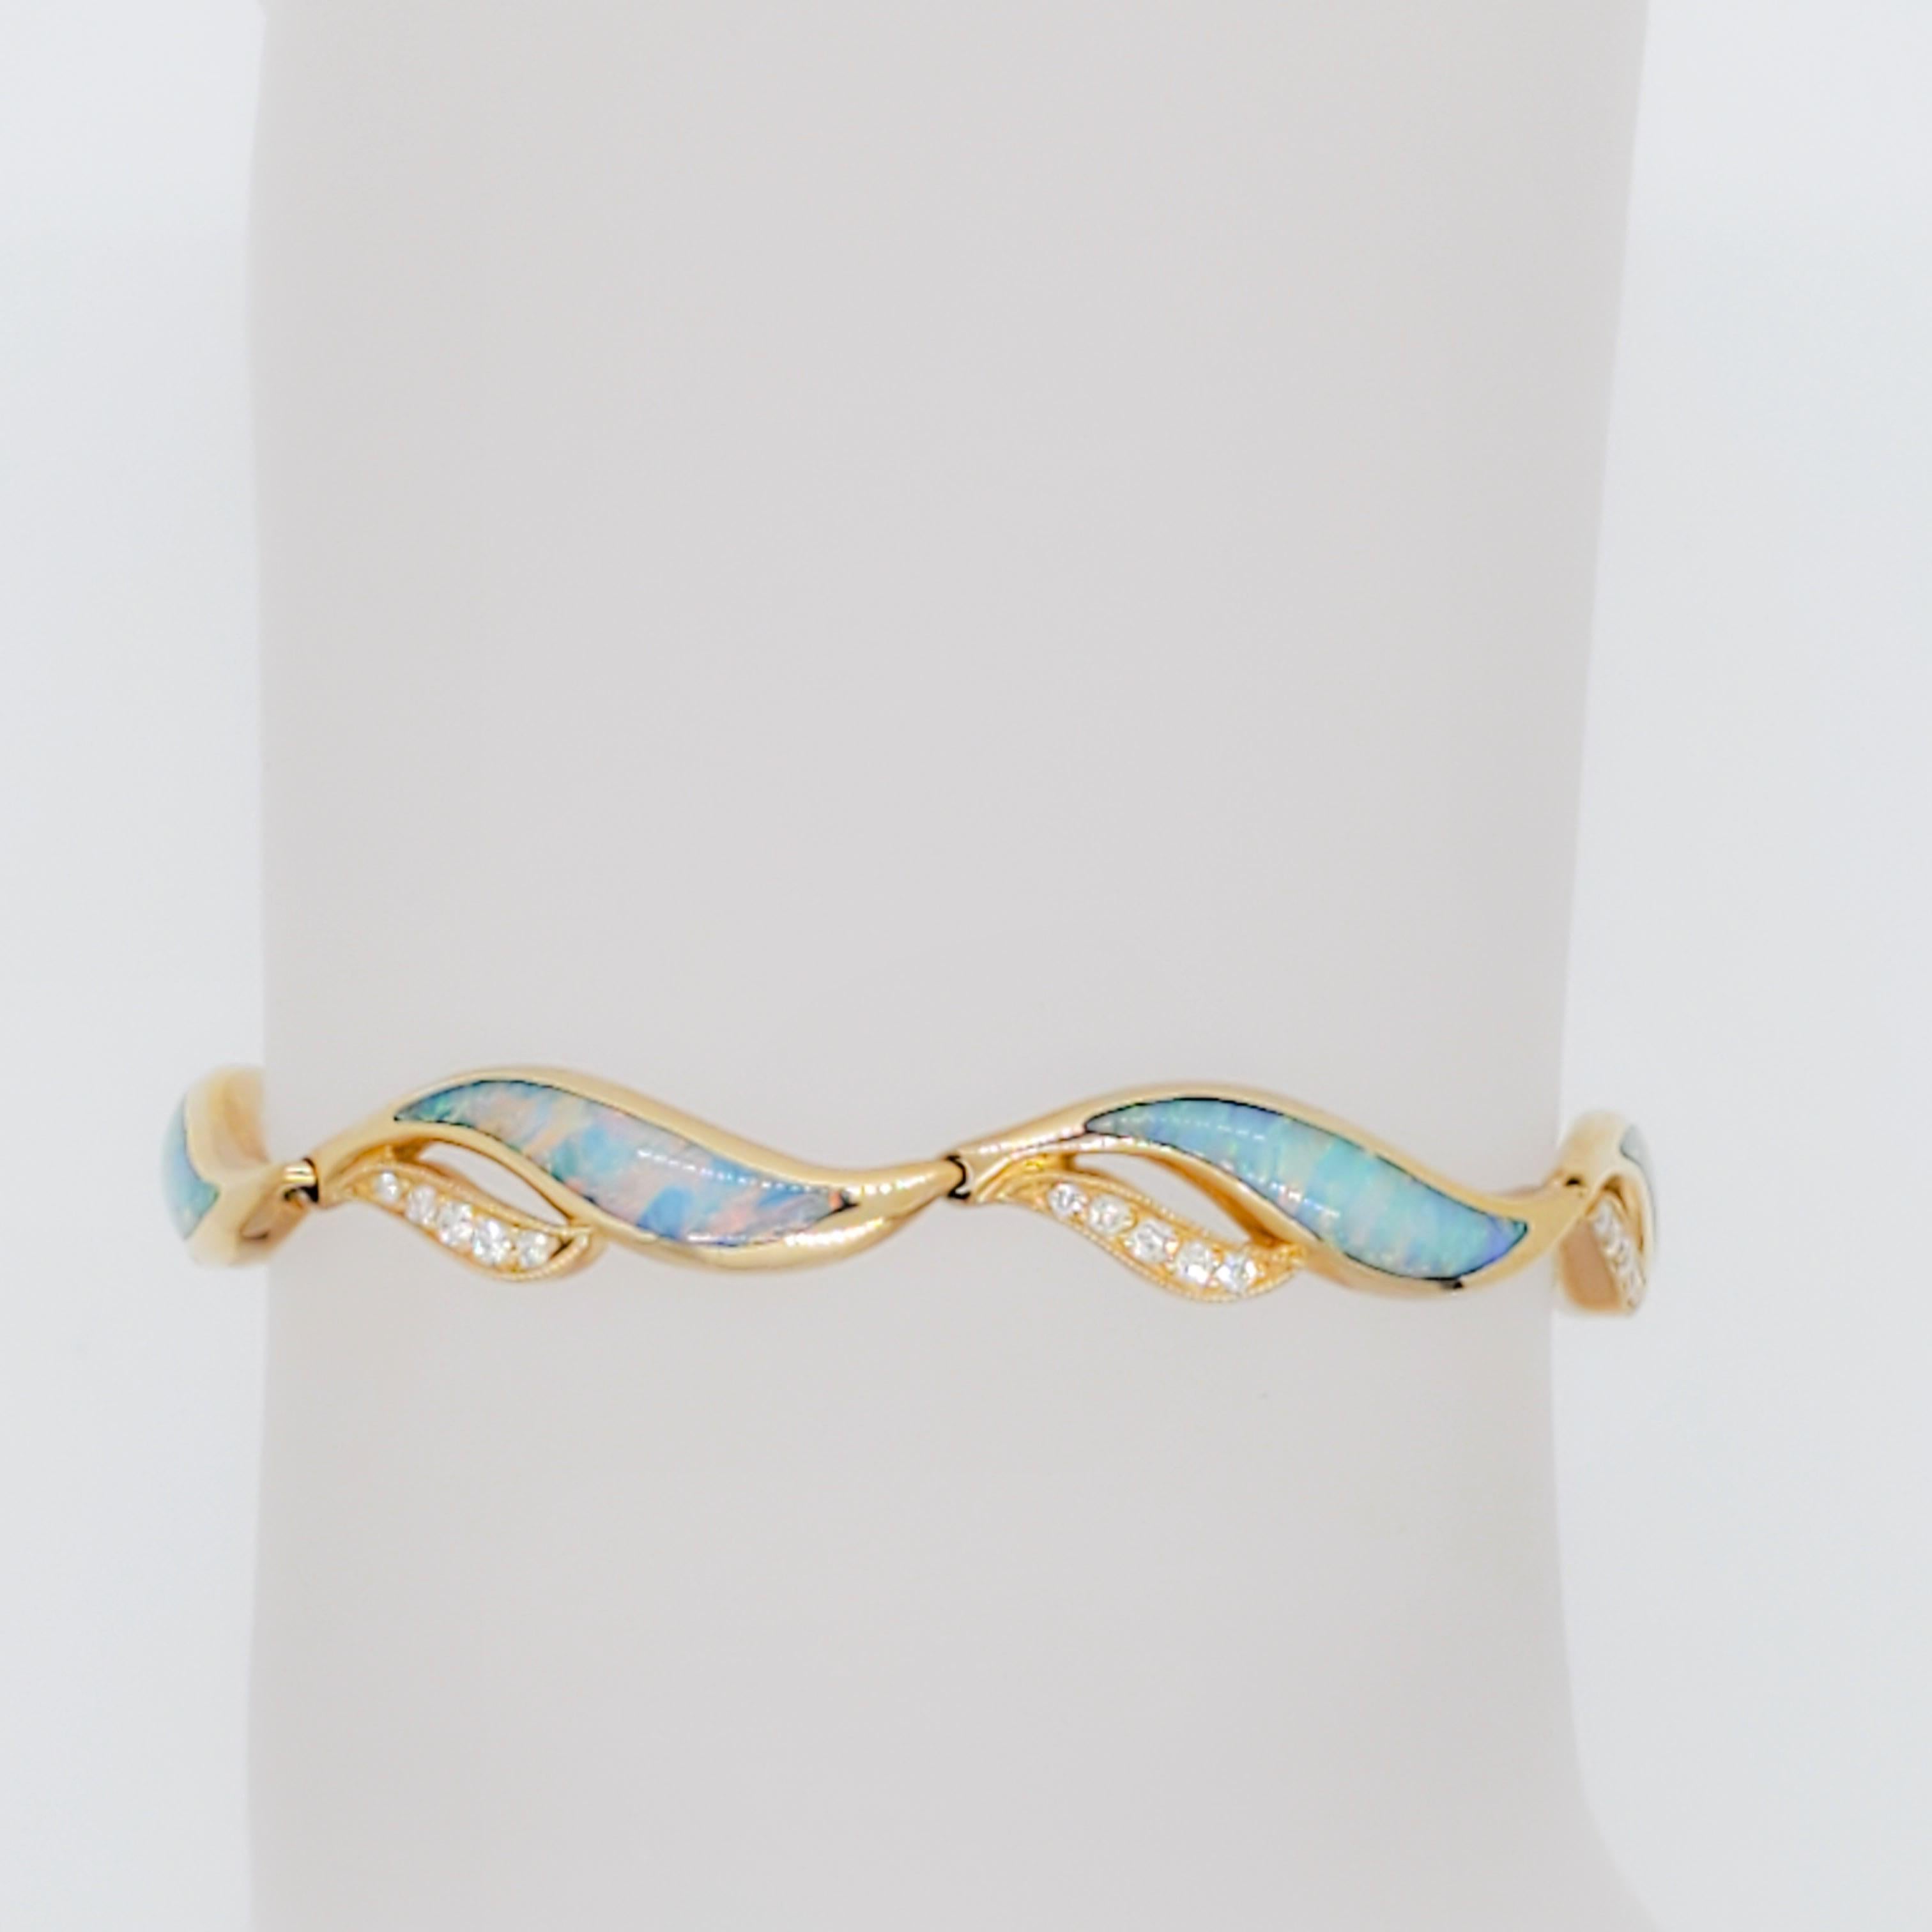 Beautiful Kabana bracelet with fancy shape opals and 0.38 ct. good quality white diamond rounds.  Handmade in 14k yellow gold.  Length is 15